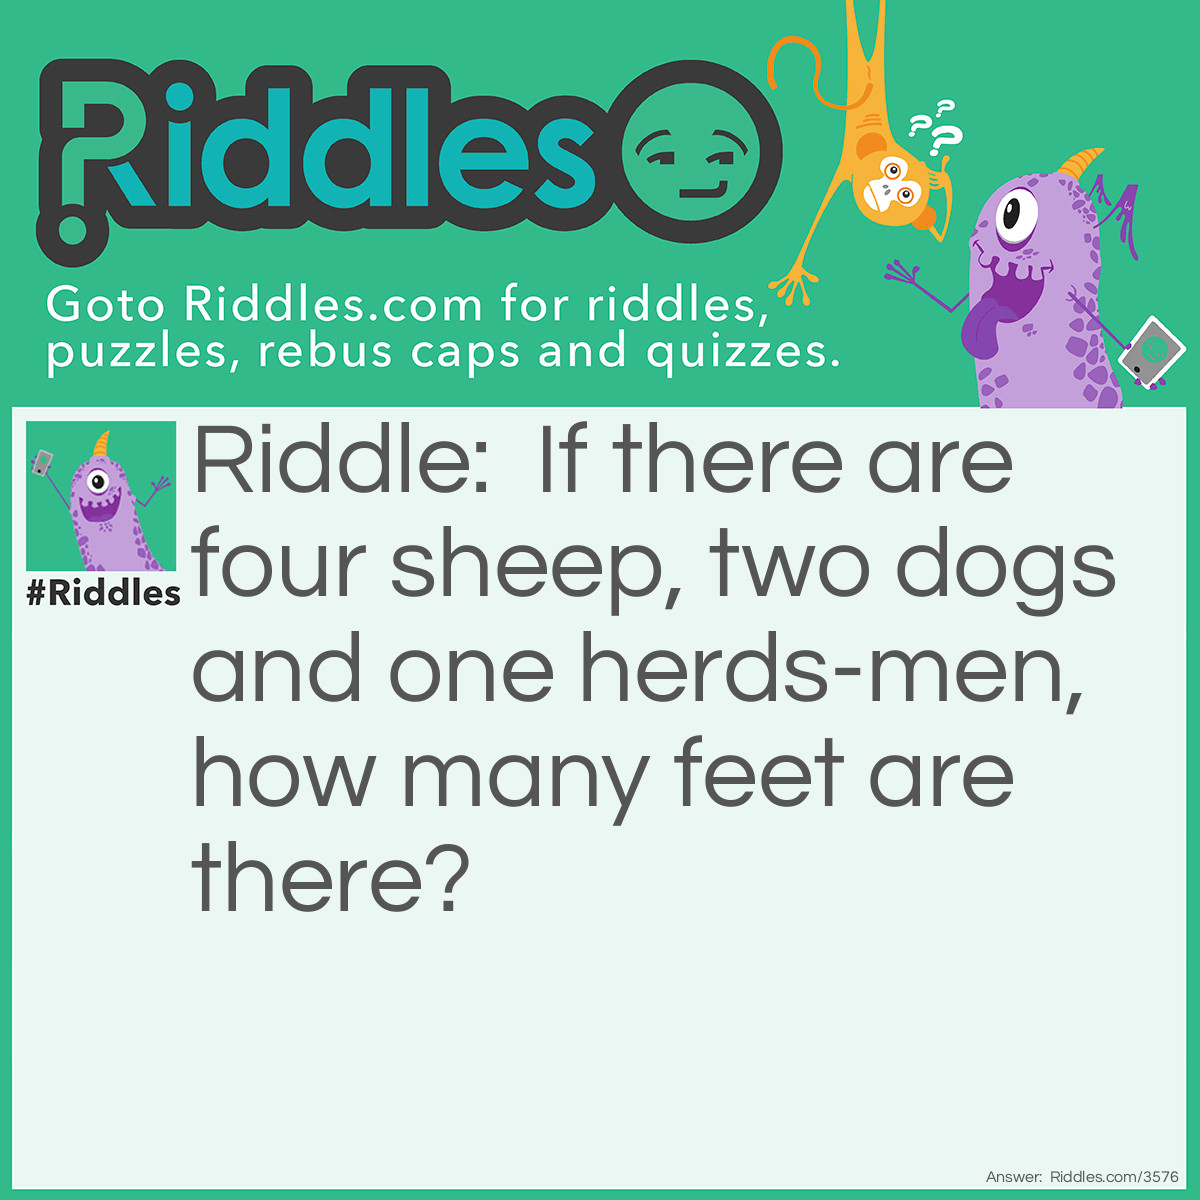 Riddle: If there are four sheep, two dogs, and one herds-men, how many feet are there? Answer: Two. Sheep have hooves; dogs have paws; only people have feet.